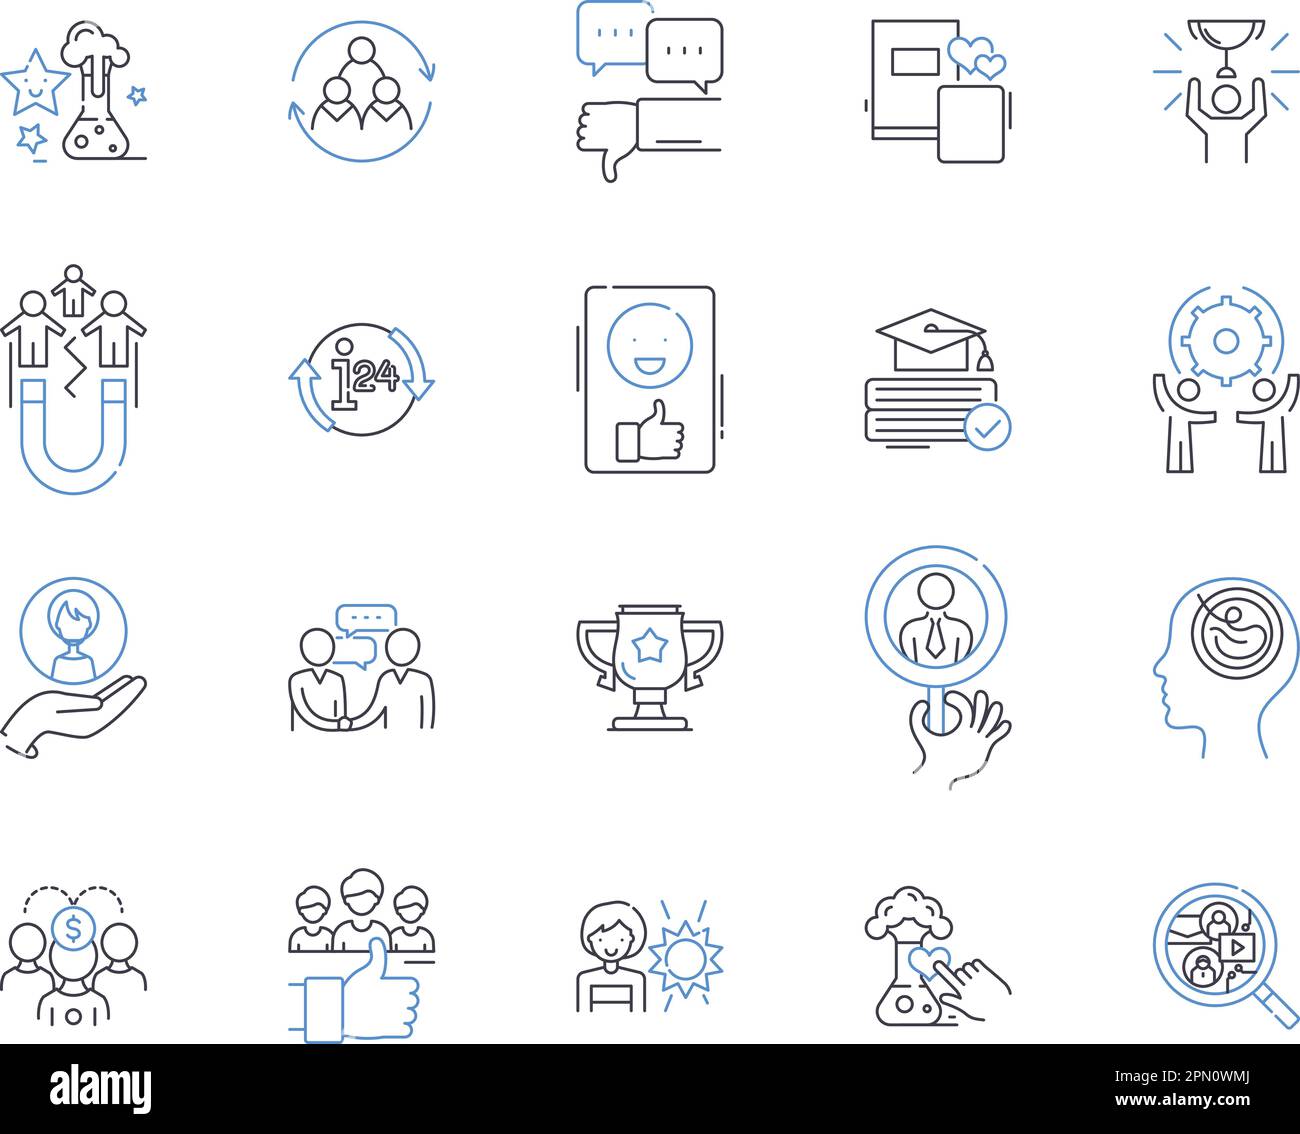 Training and business outline icons collection. Training, Business, Coaching, Education, Development, Workshop, Learning vector and illustration Stock Vector